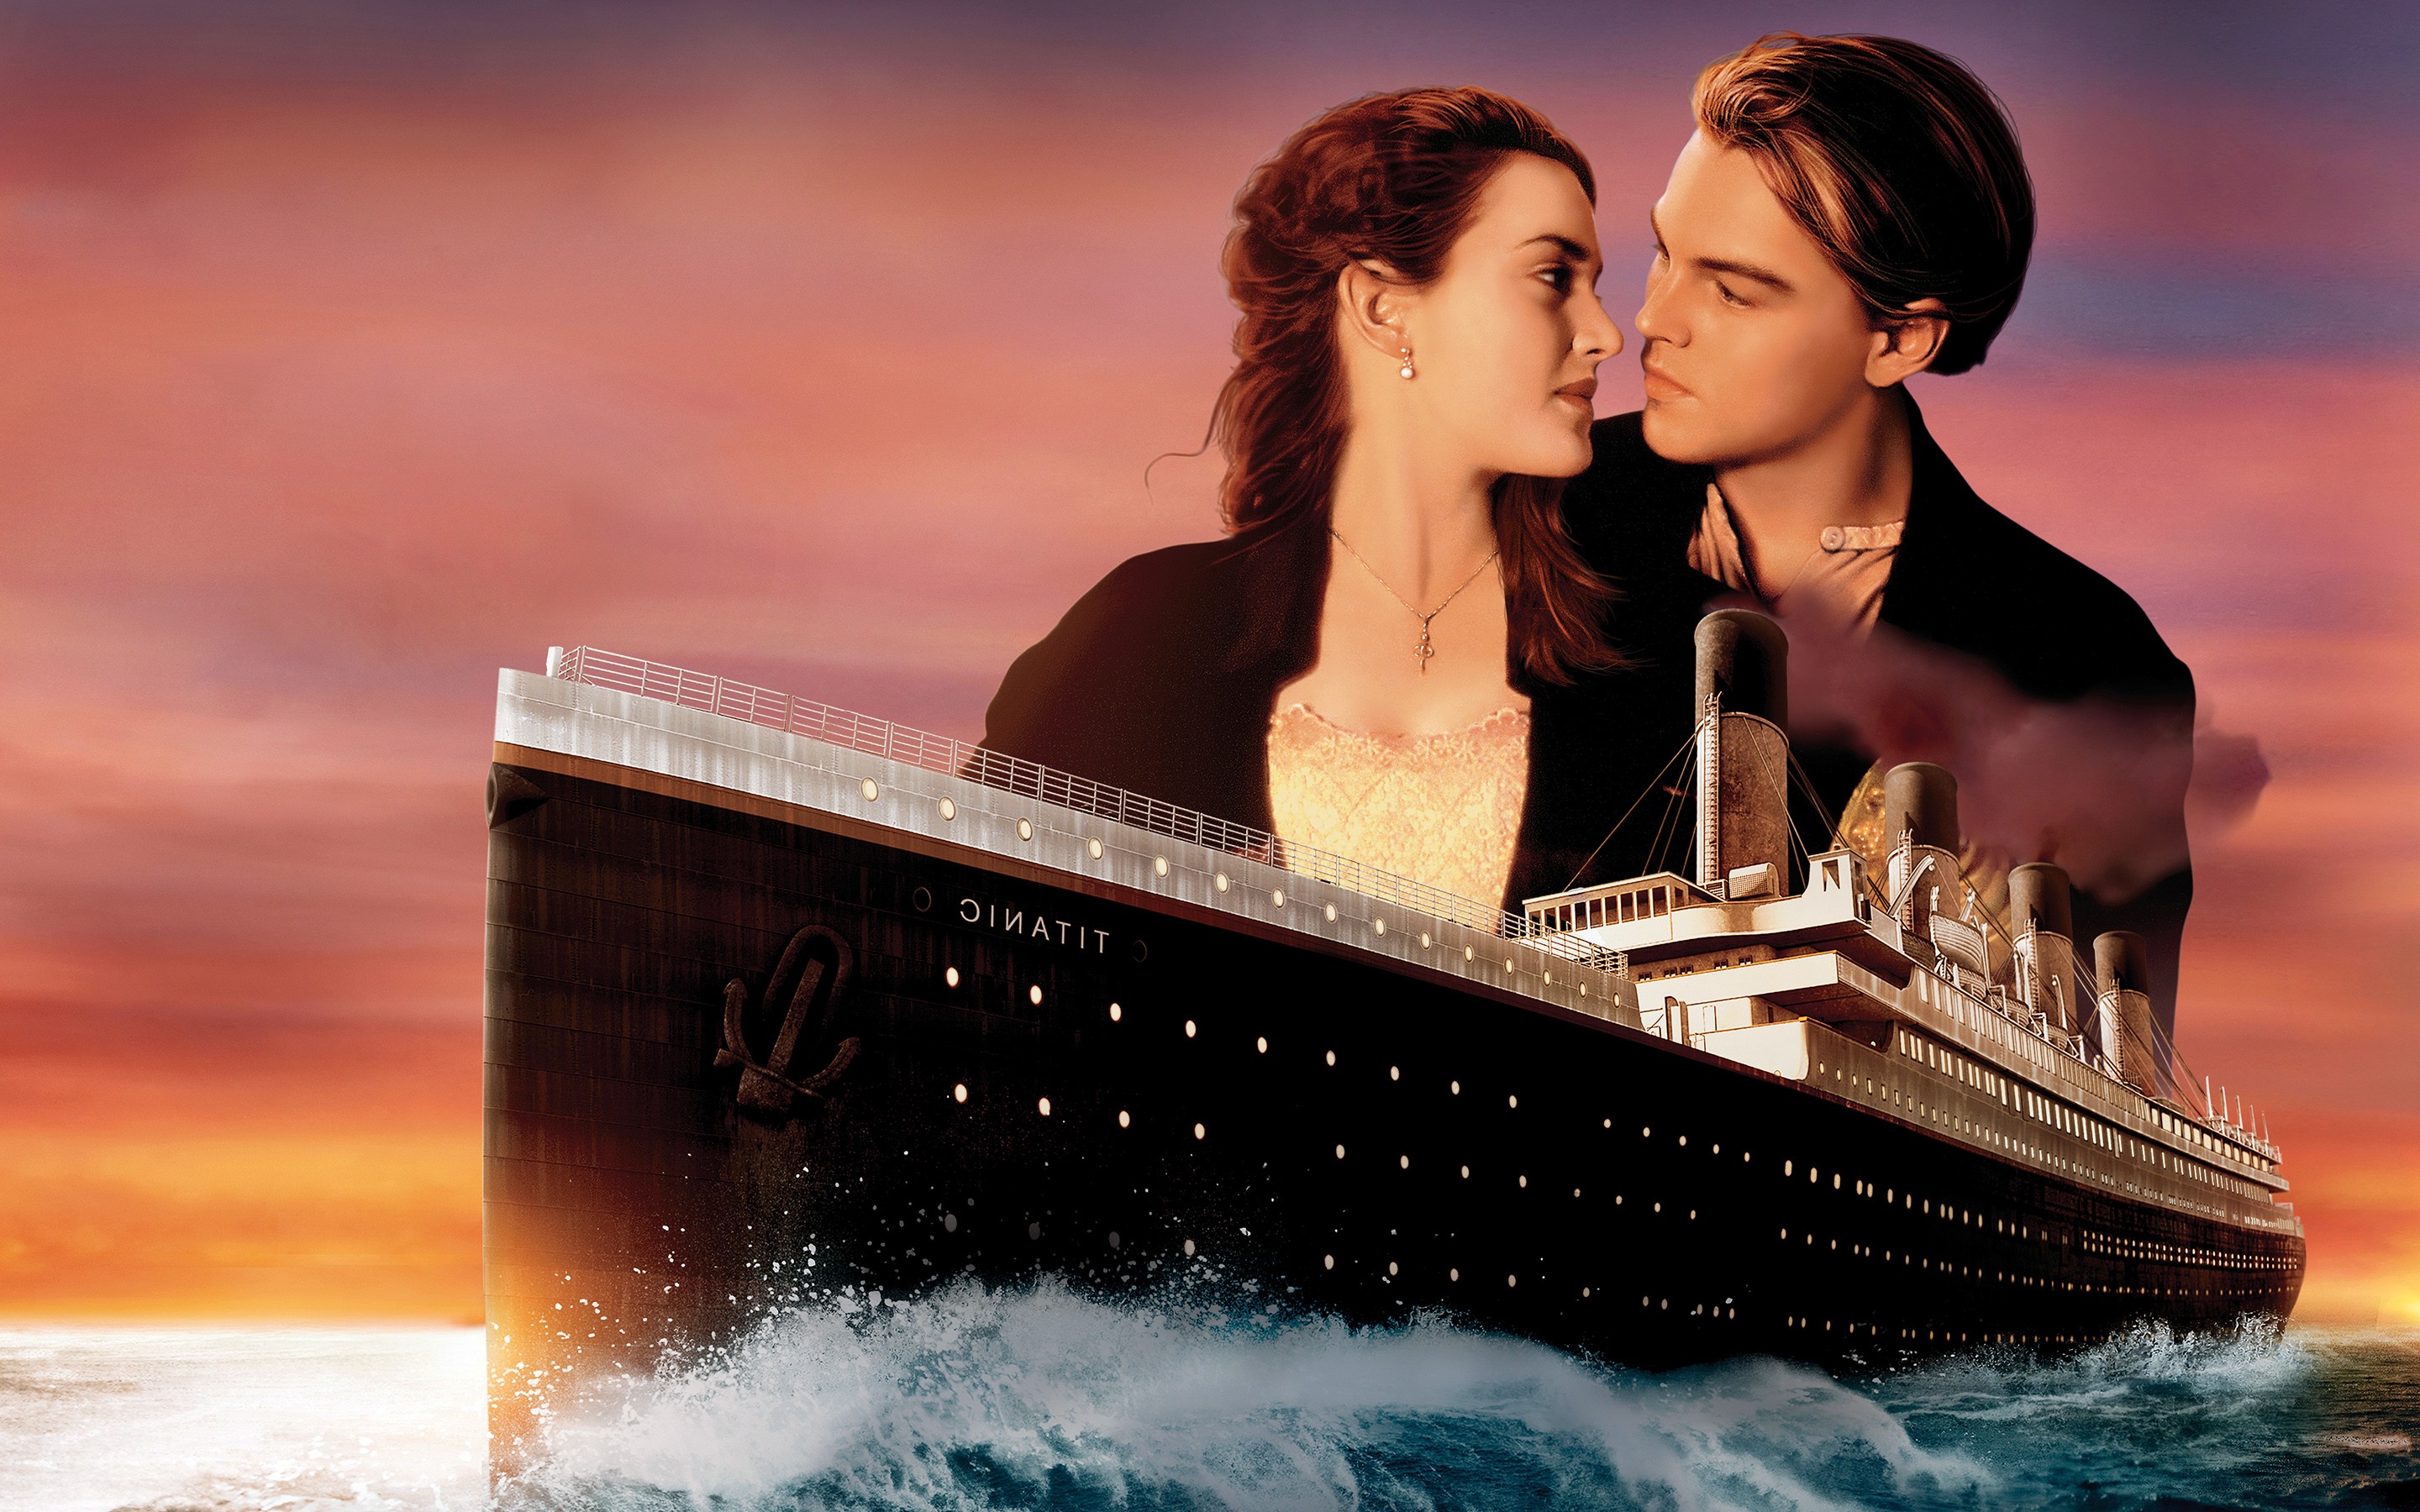 Titanic movie full hd hd movies k wallpapers images backgrounds photos and pictures